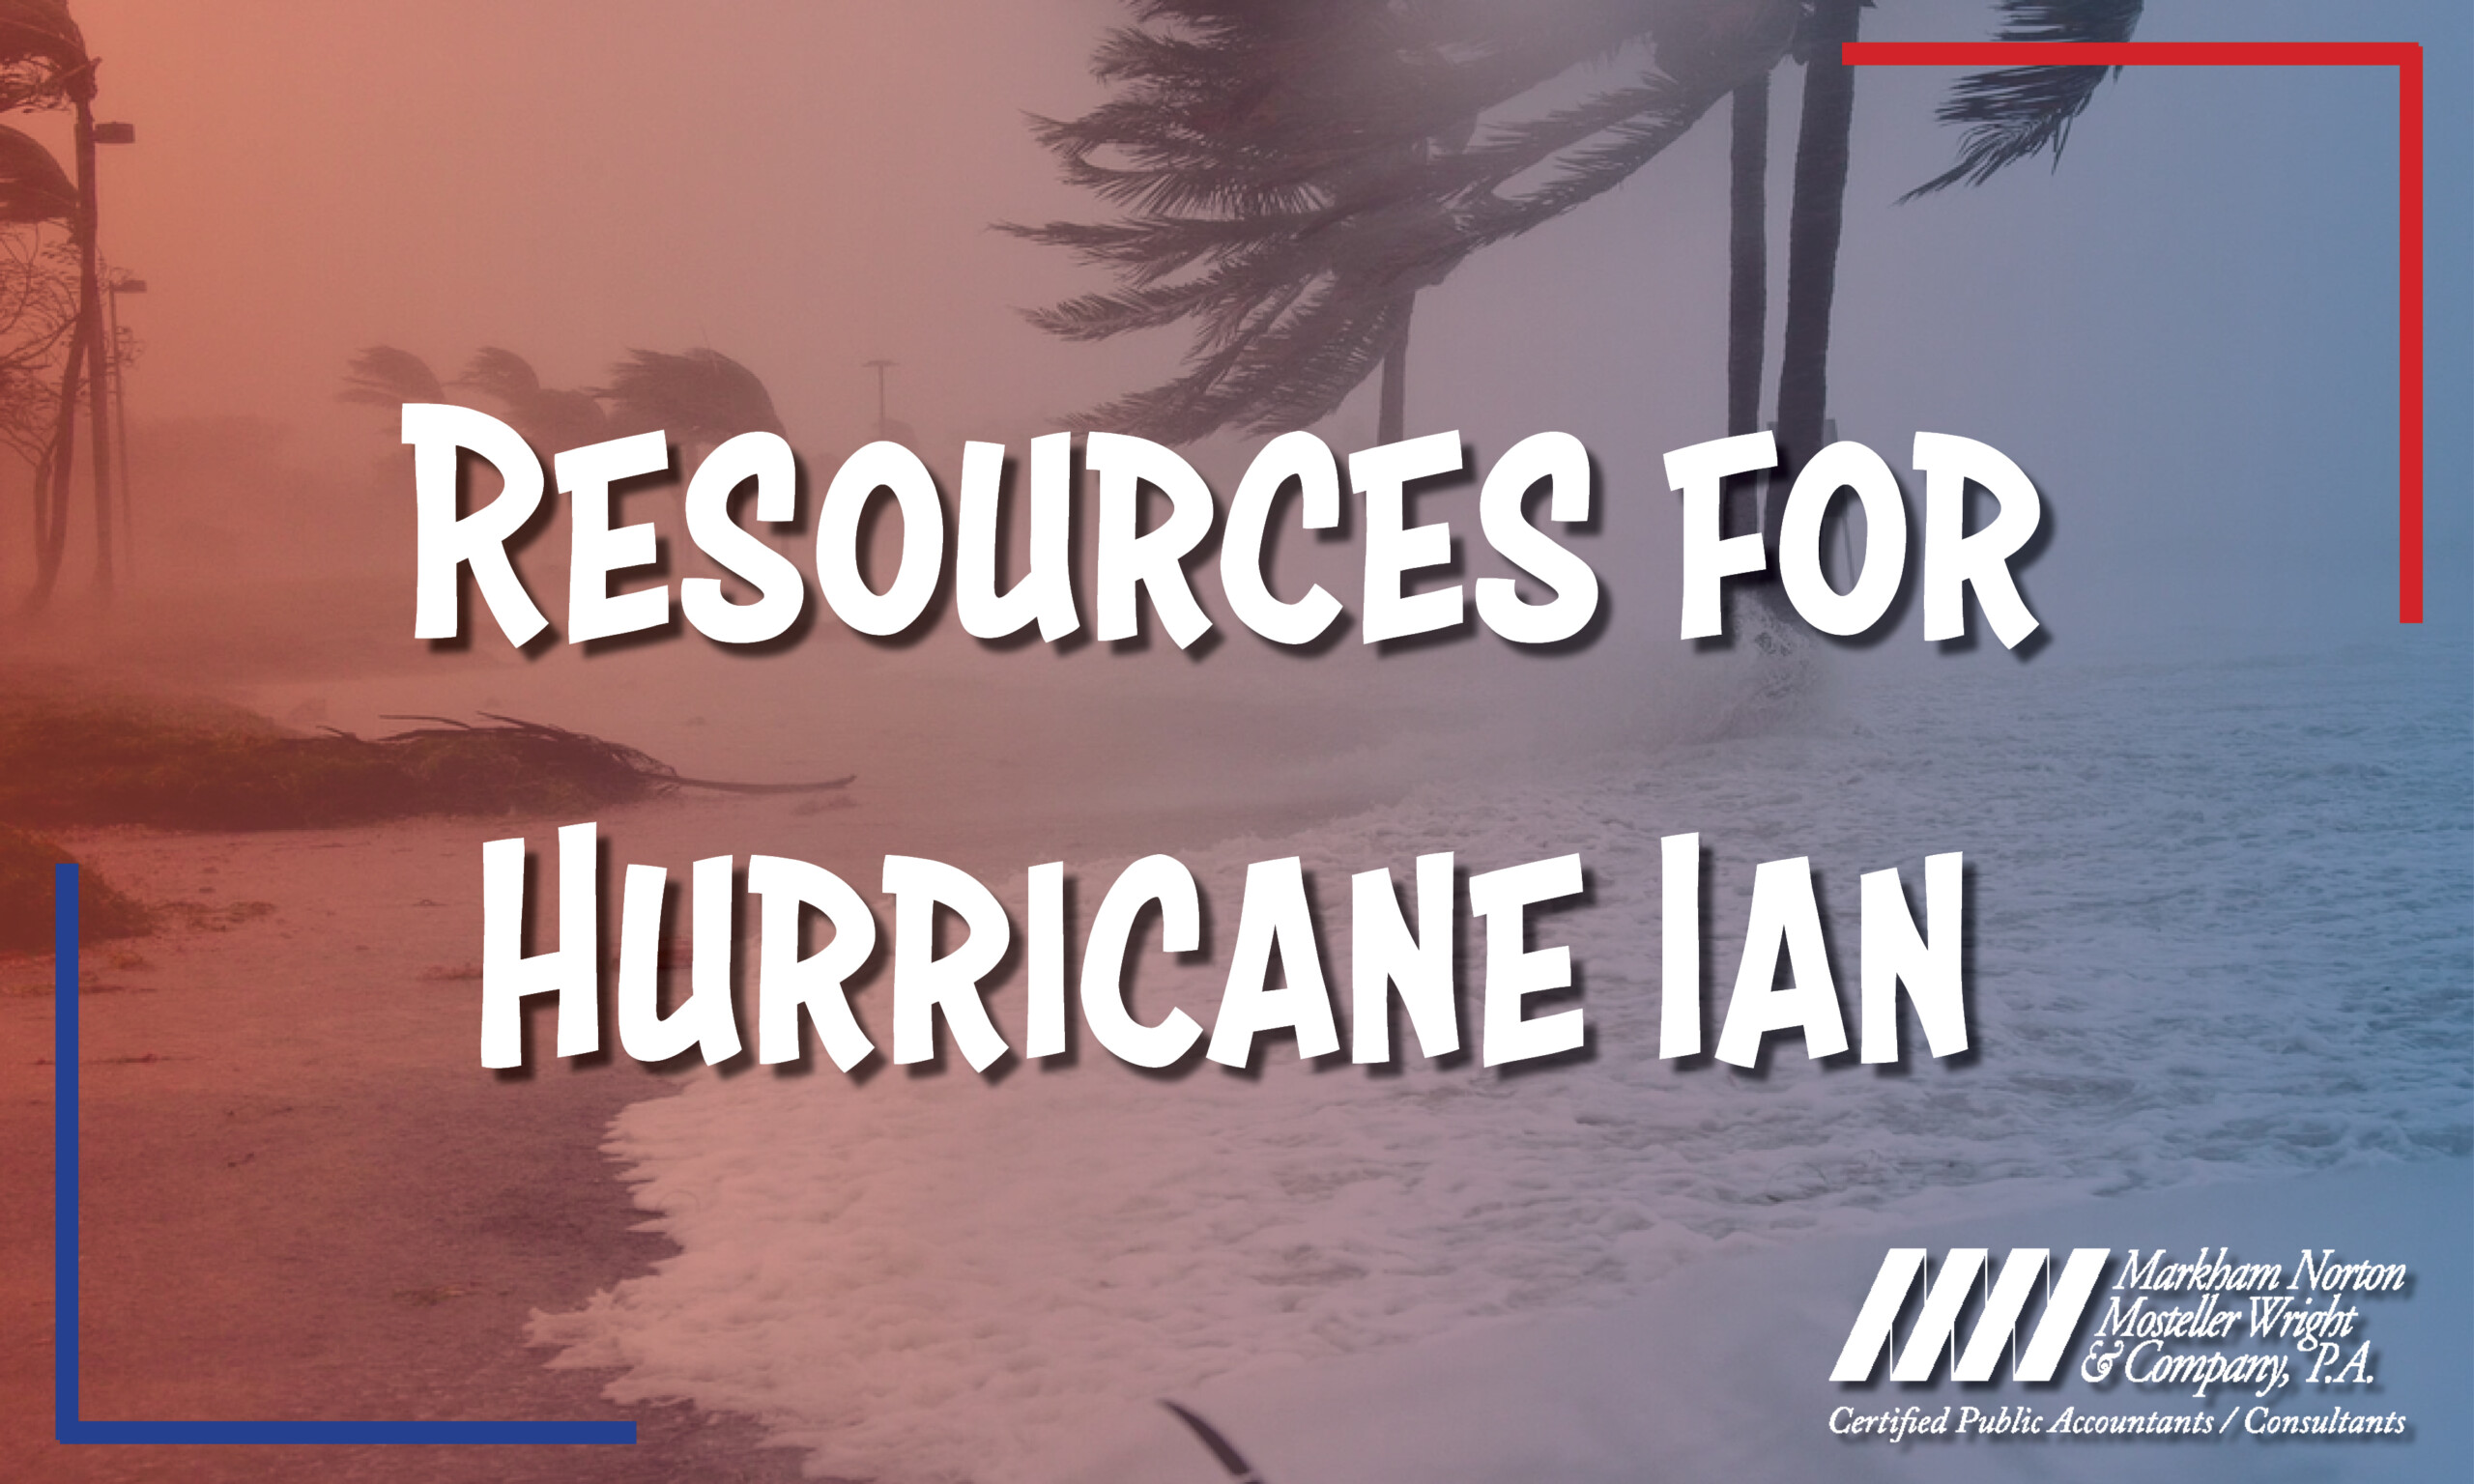 Resources for Hurricane Ian